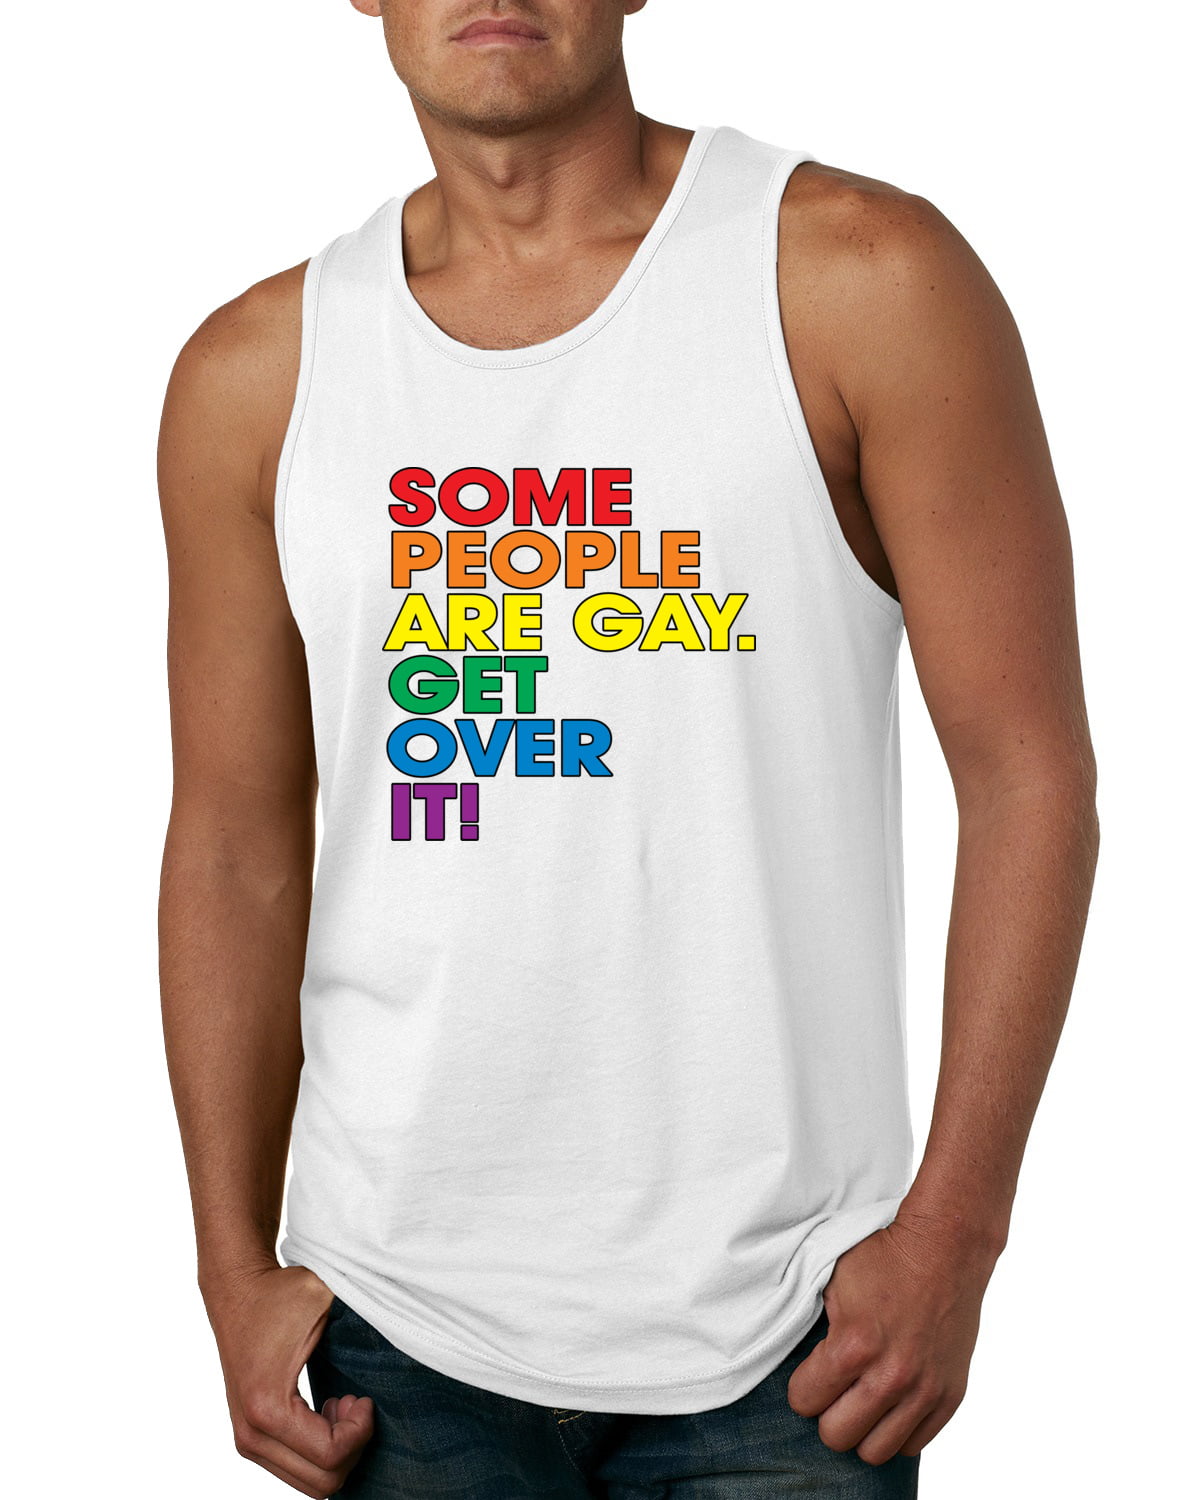 Tank Top LGBTQ Pride Rainbow Sleeveless Tee Hunt Some People are Gay Get Over It 